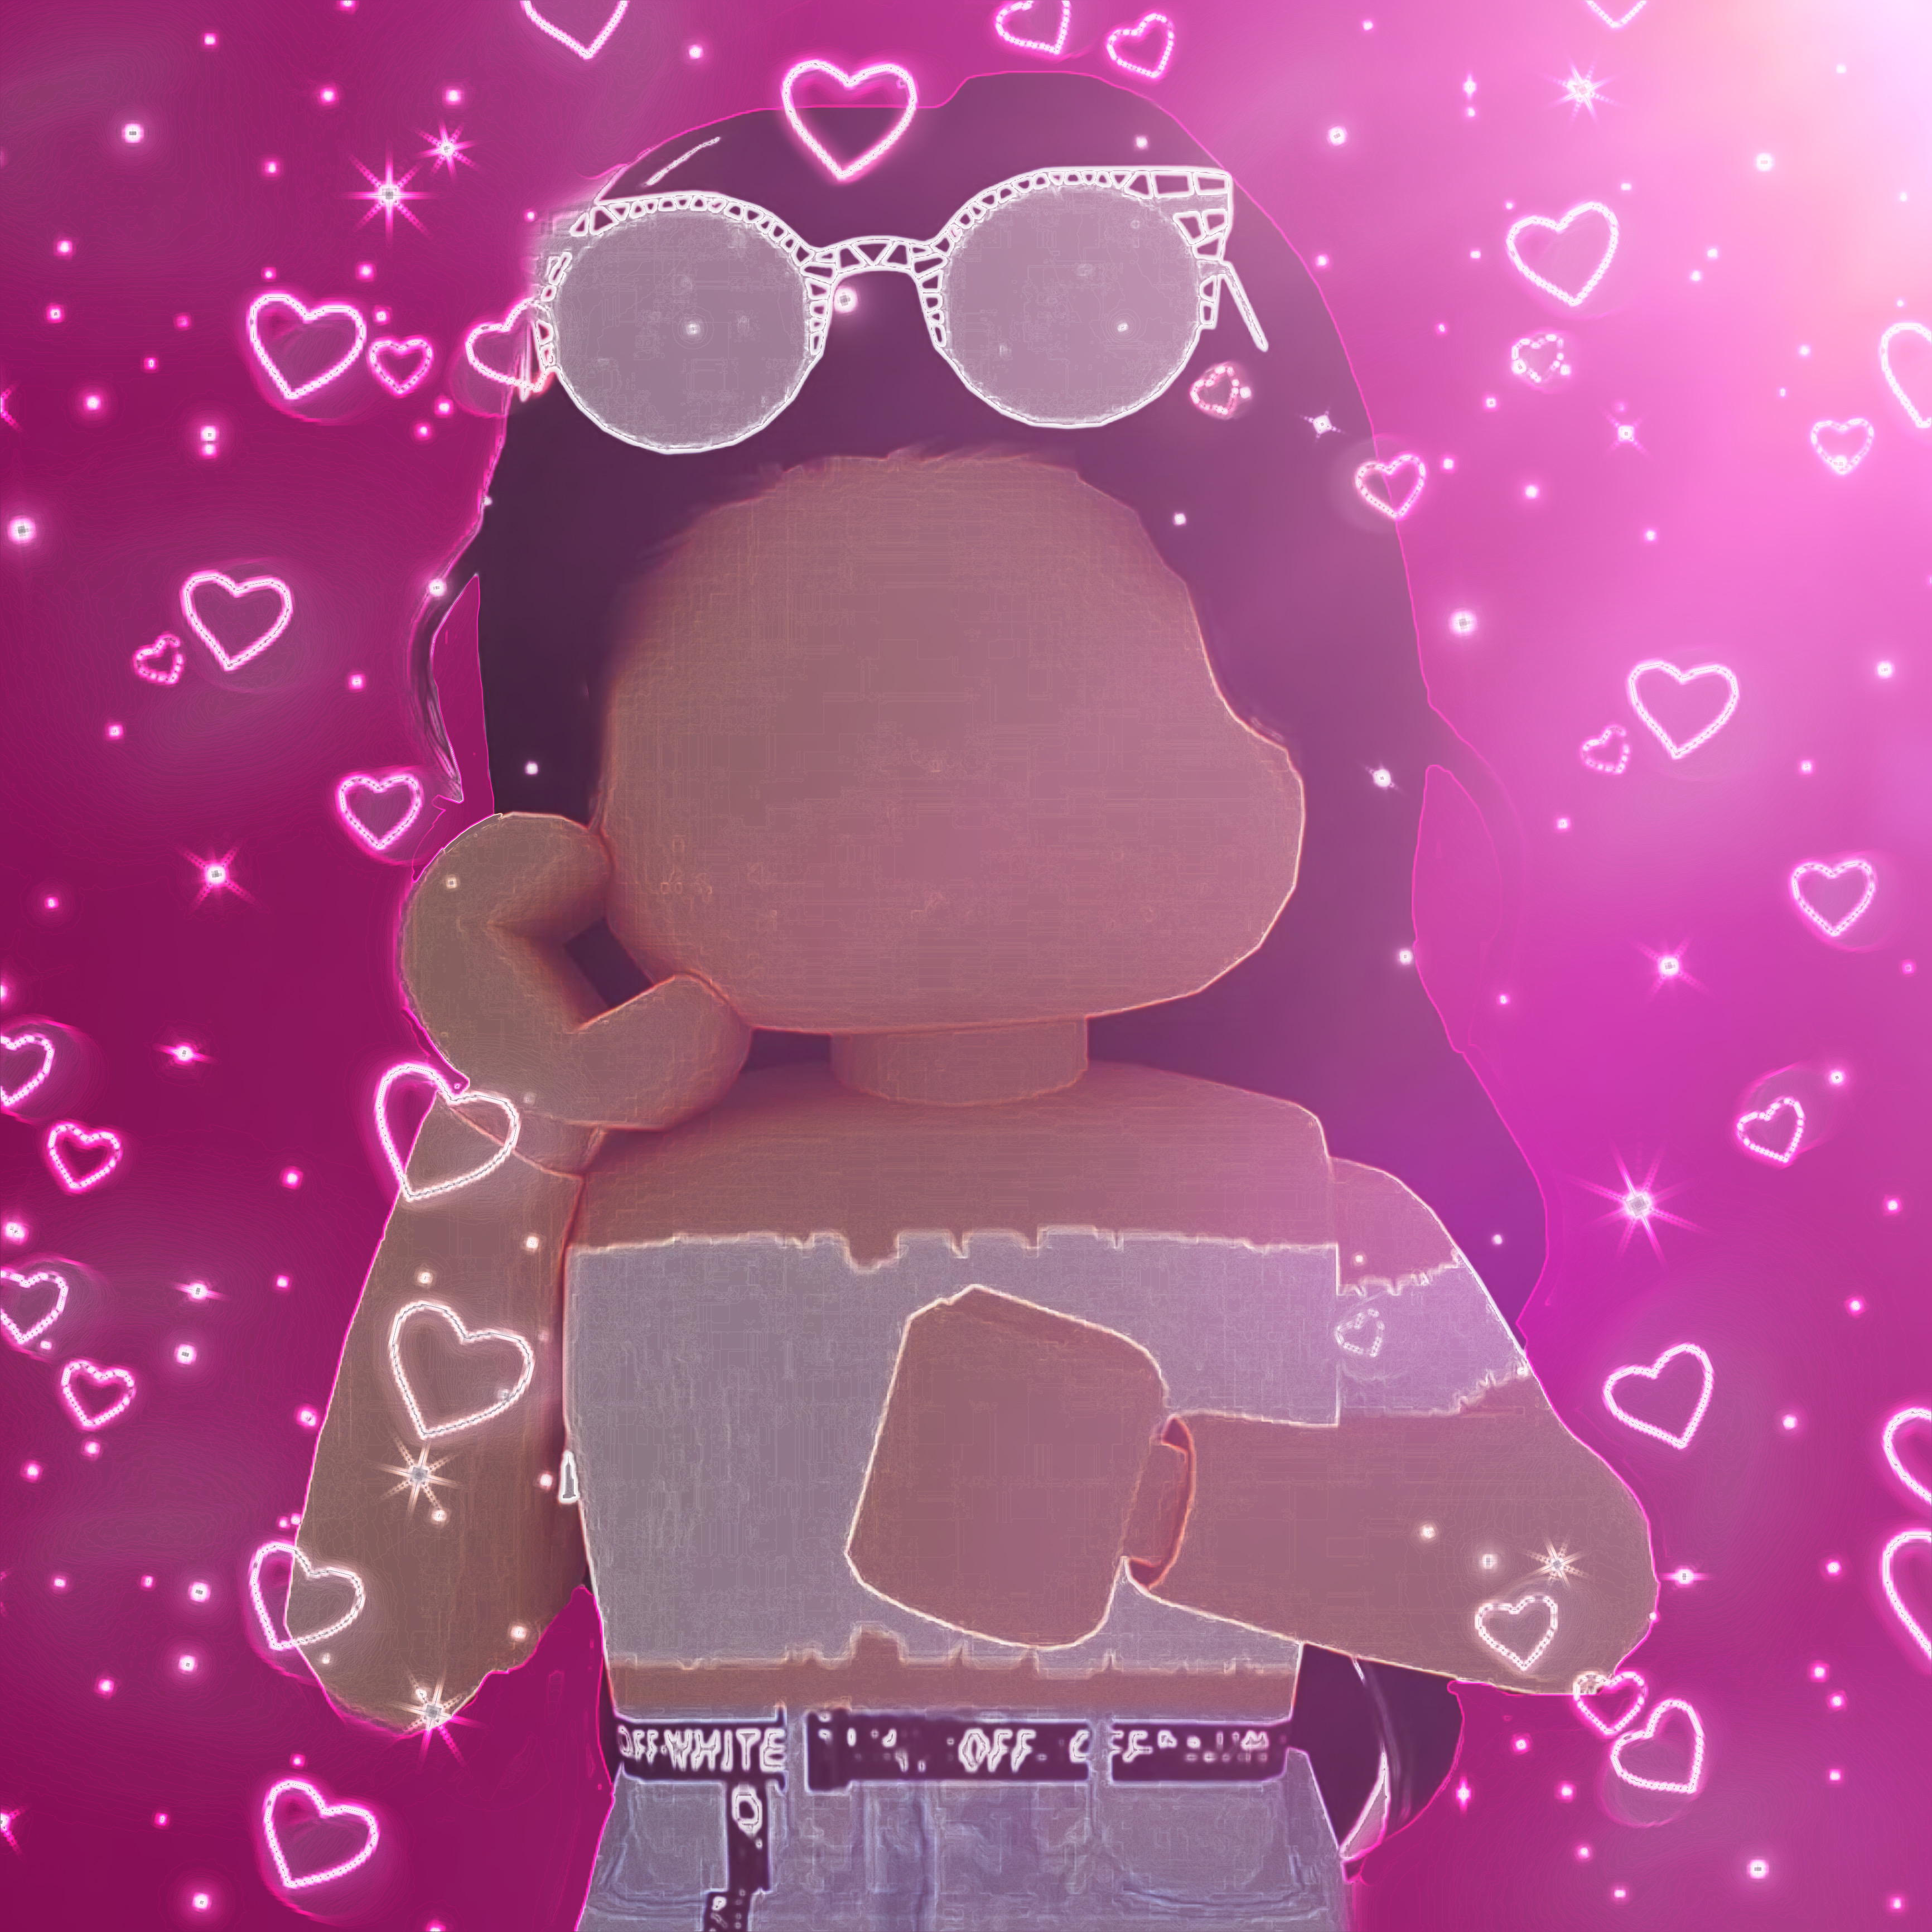 Roblox Aesthetic Tiktok Image By Emmie - roblox profile pictures for tiktok